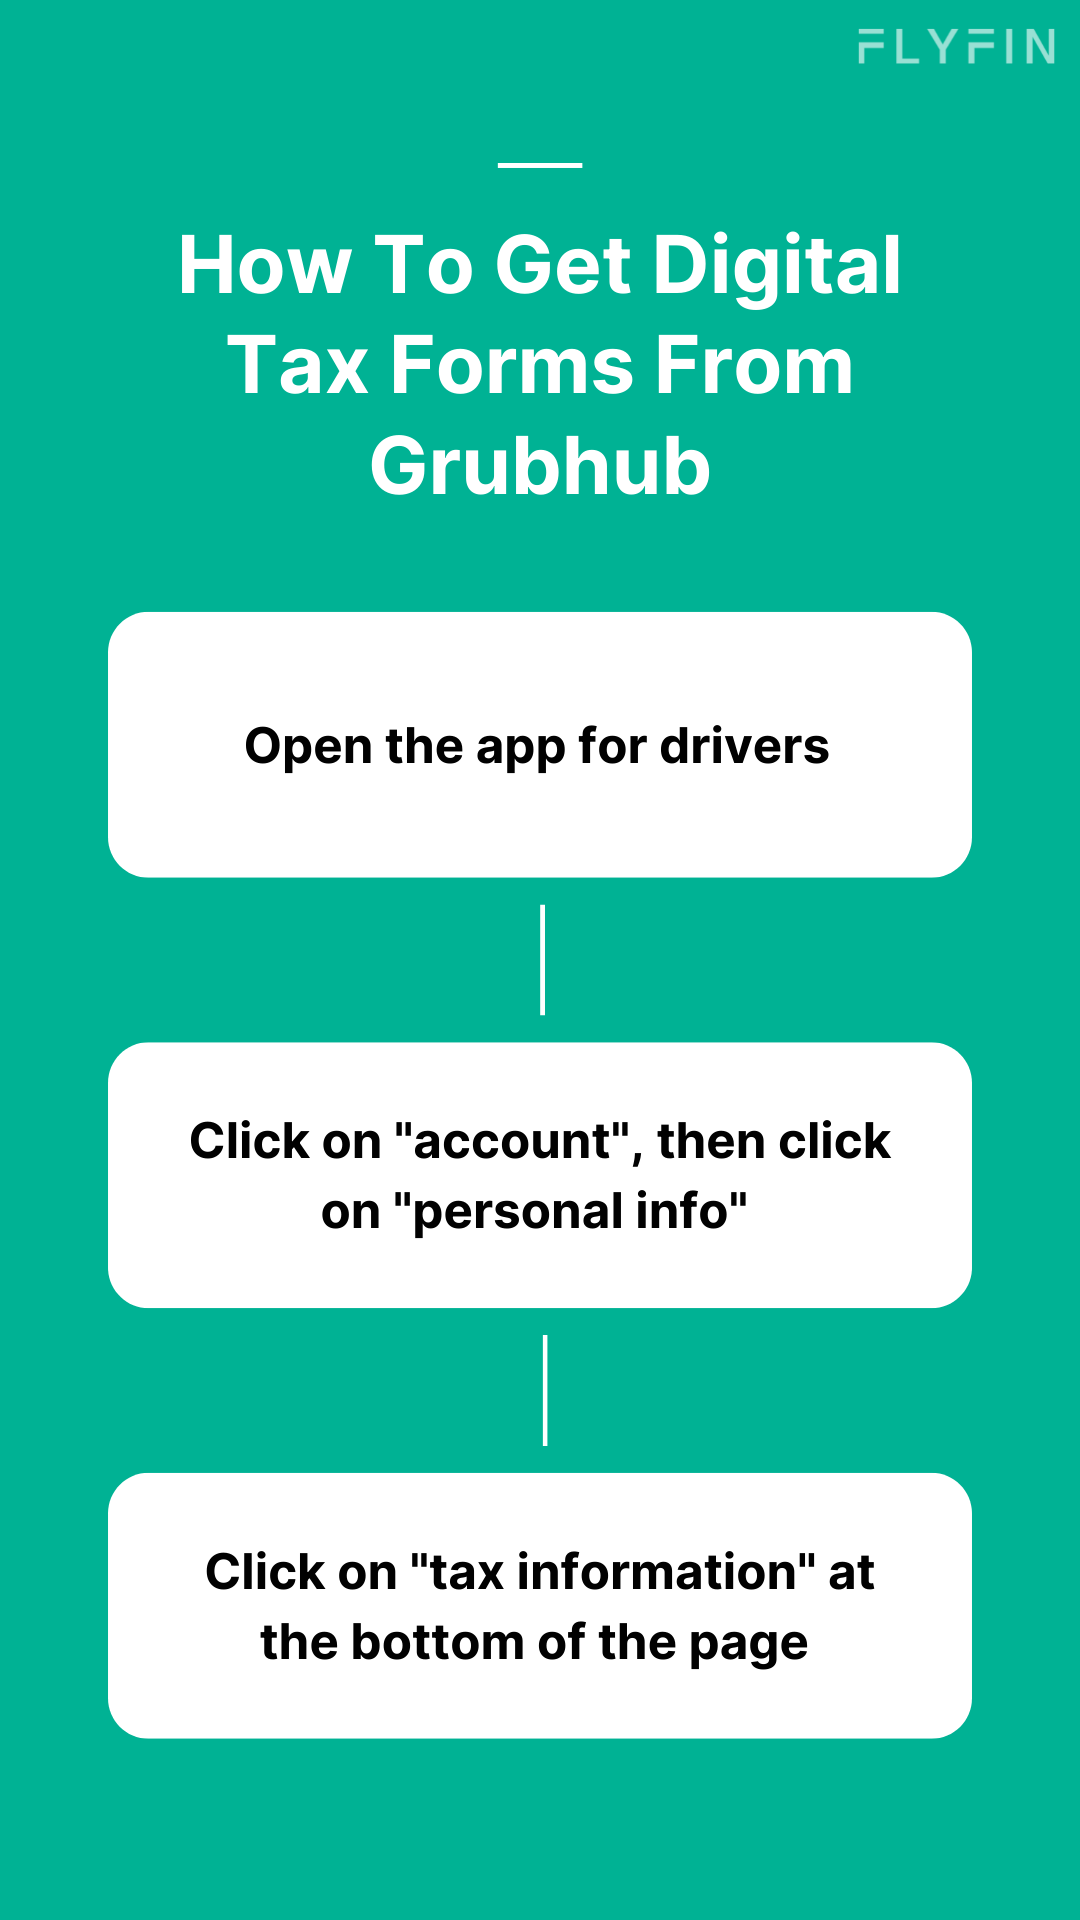 How to get 1099 from Grubhub